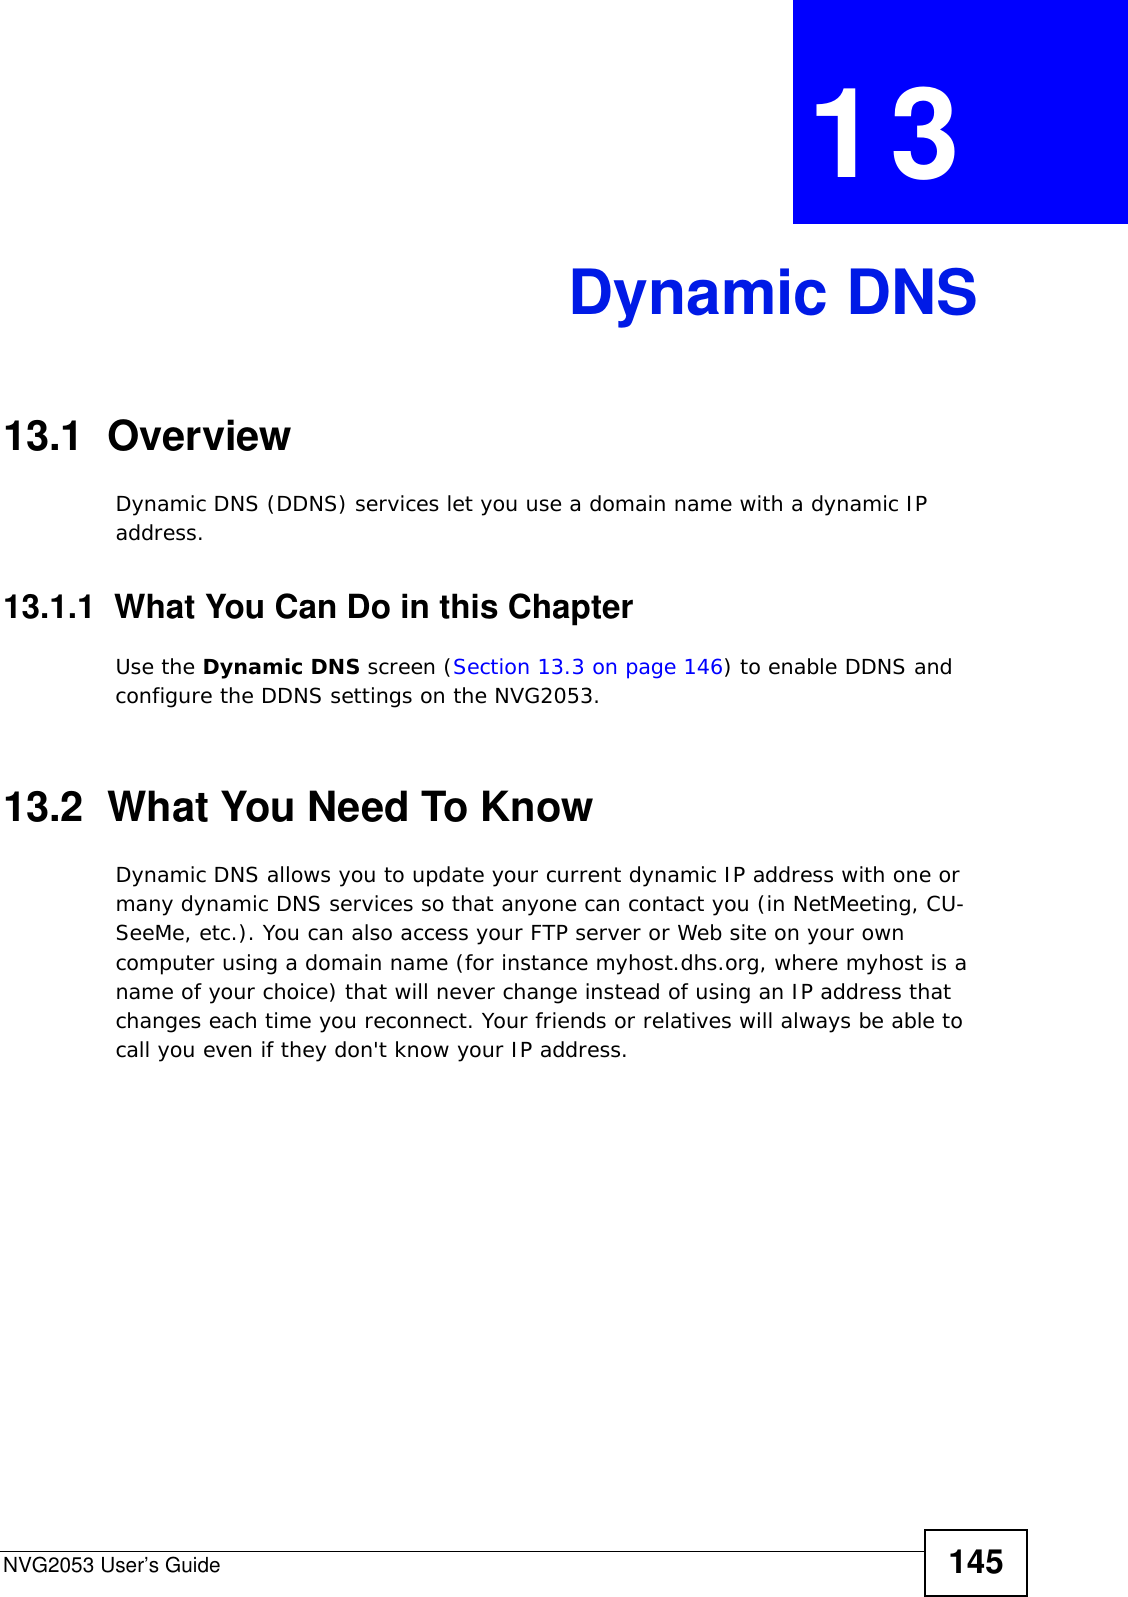 NVG2053 User’s Guide 145CHAPTER  13 Dynamic DNS13.1  Overview Dynamic DNS (DDNS) services let you use a domain name with a dynamic IP address.13.1.1  What You Can Do in this ChapterUse the Dynamic DNS screen (Section 13.3 on page 146) to enable DDNS and configure the DDNS settings on the NVG2053.13.2  What You Need To KnowDynamic DNS allows you to update your current dynamic IP address with one or many dynamic DNS services so that anyone can contact you (in NetMeeting, CU-SeeMe, etc.). You can also access your FTP server or Web site on your own computer using a domain name (for instance myhost.dhs.org, where myhost is a name of your choice) that will never change instead of using an IP address that changes each time you reconnect. Your friends or relatives will always be able to call you even if they don&apos;t know your IP address.